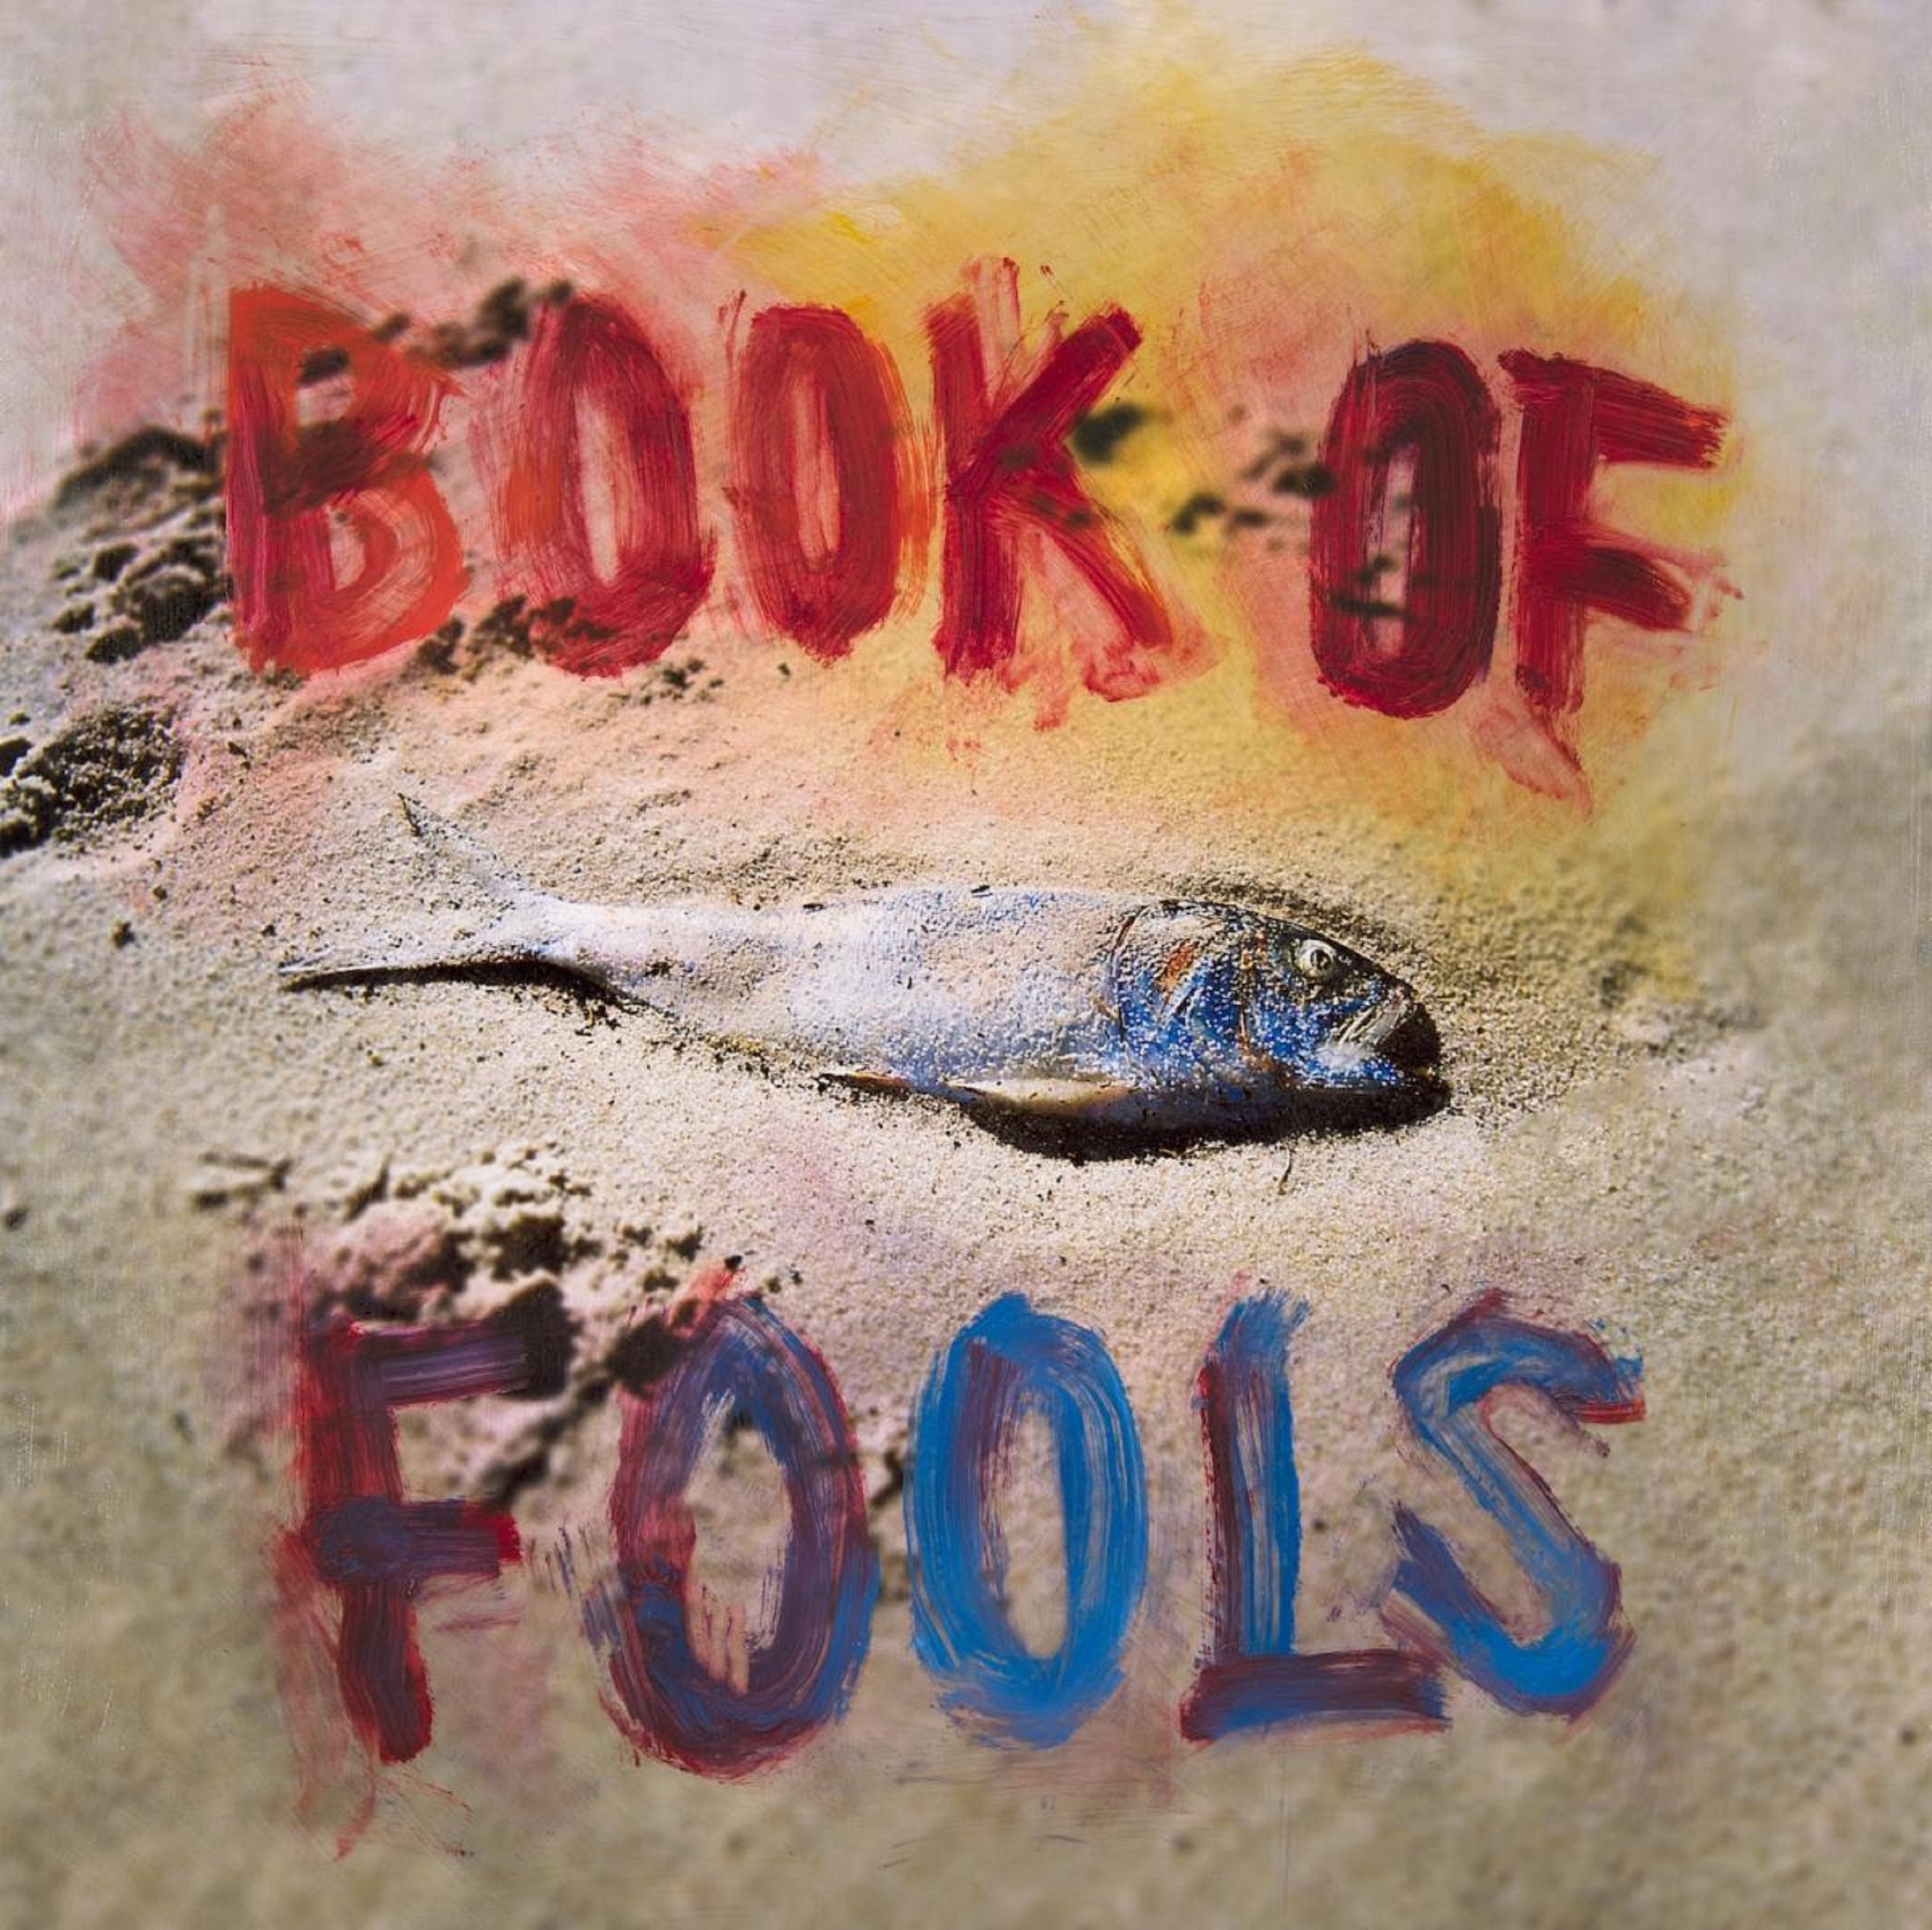 Mipso announce 6th LP 'Book of Fools' + share single "Carolina Rolling By" today | Tour starts in August